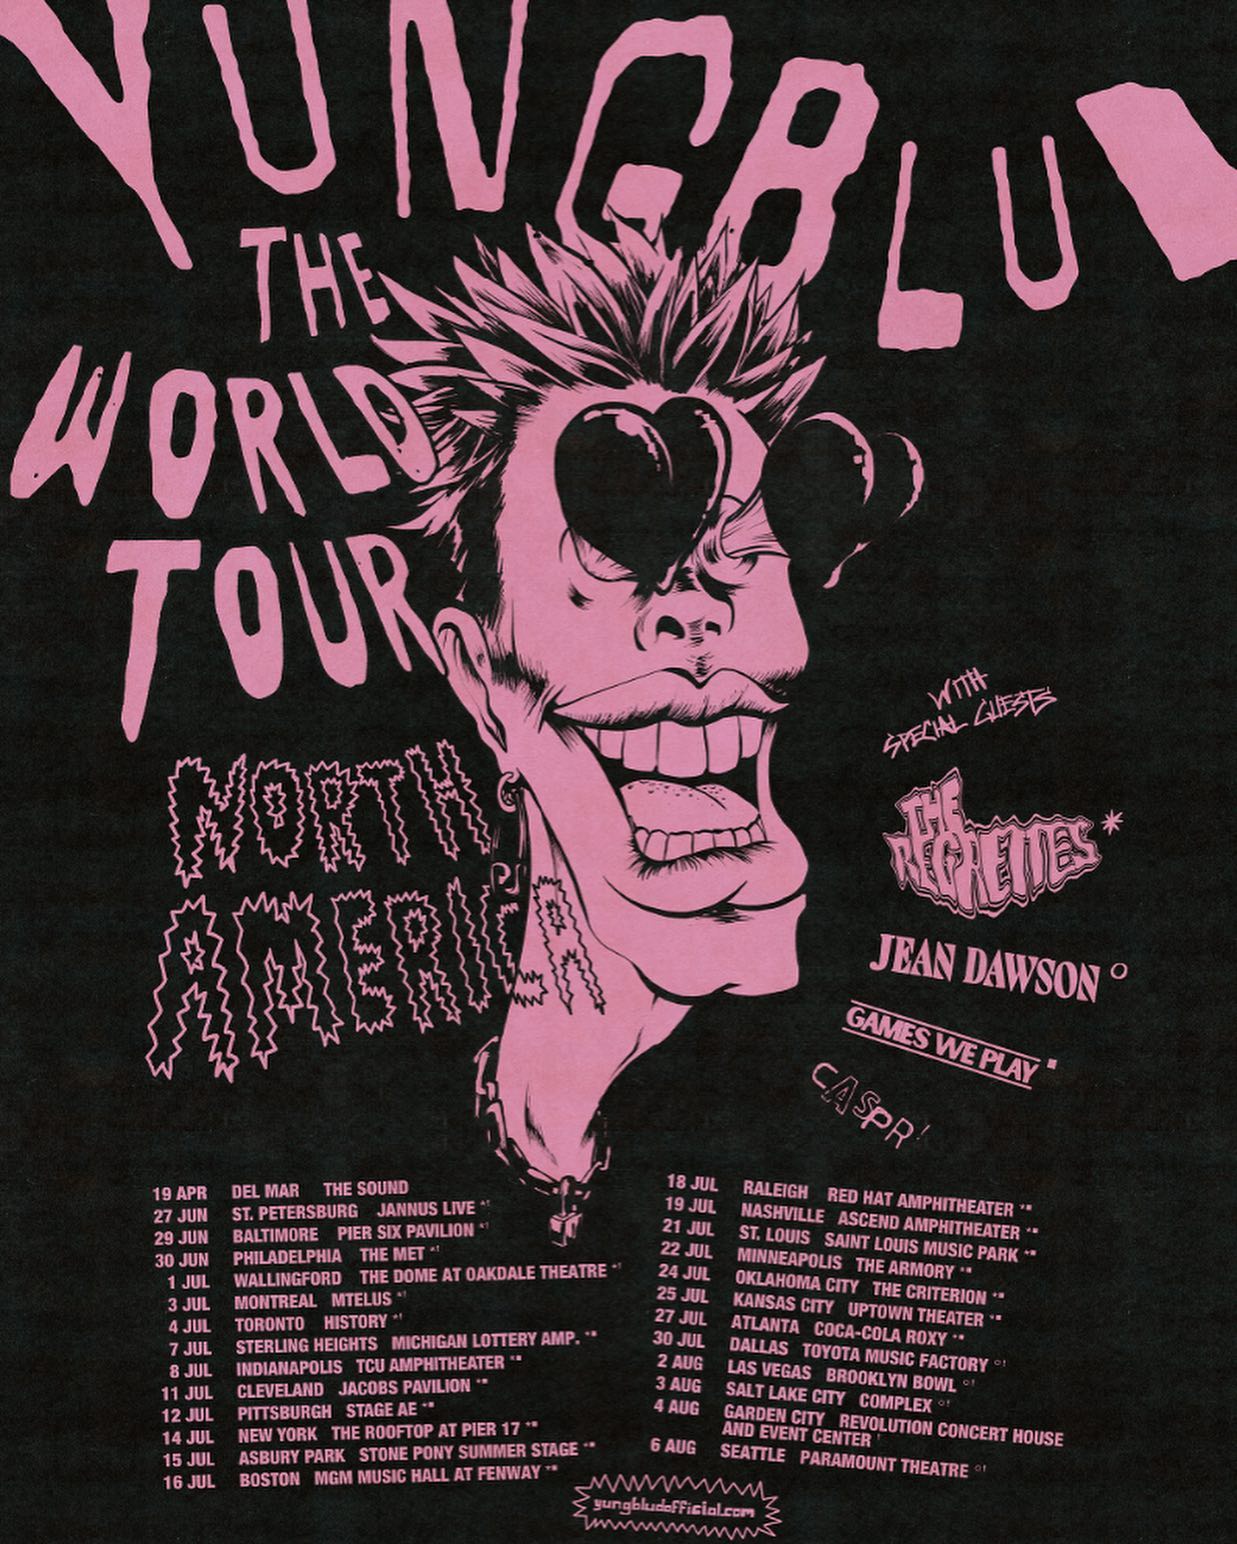 Yungblud The World Tour in Oklahoma City